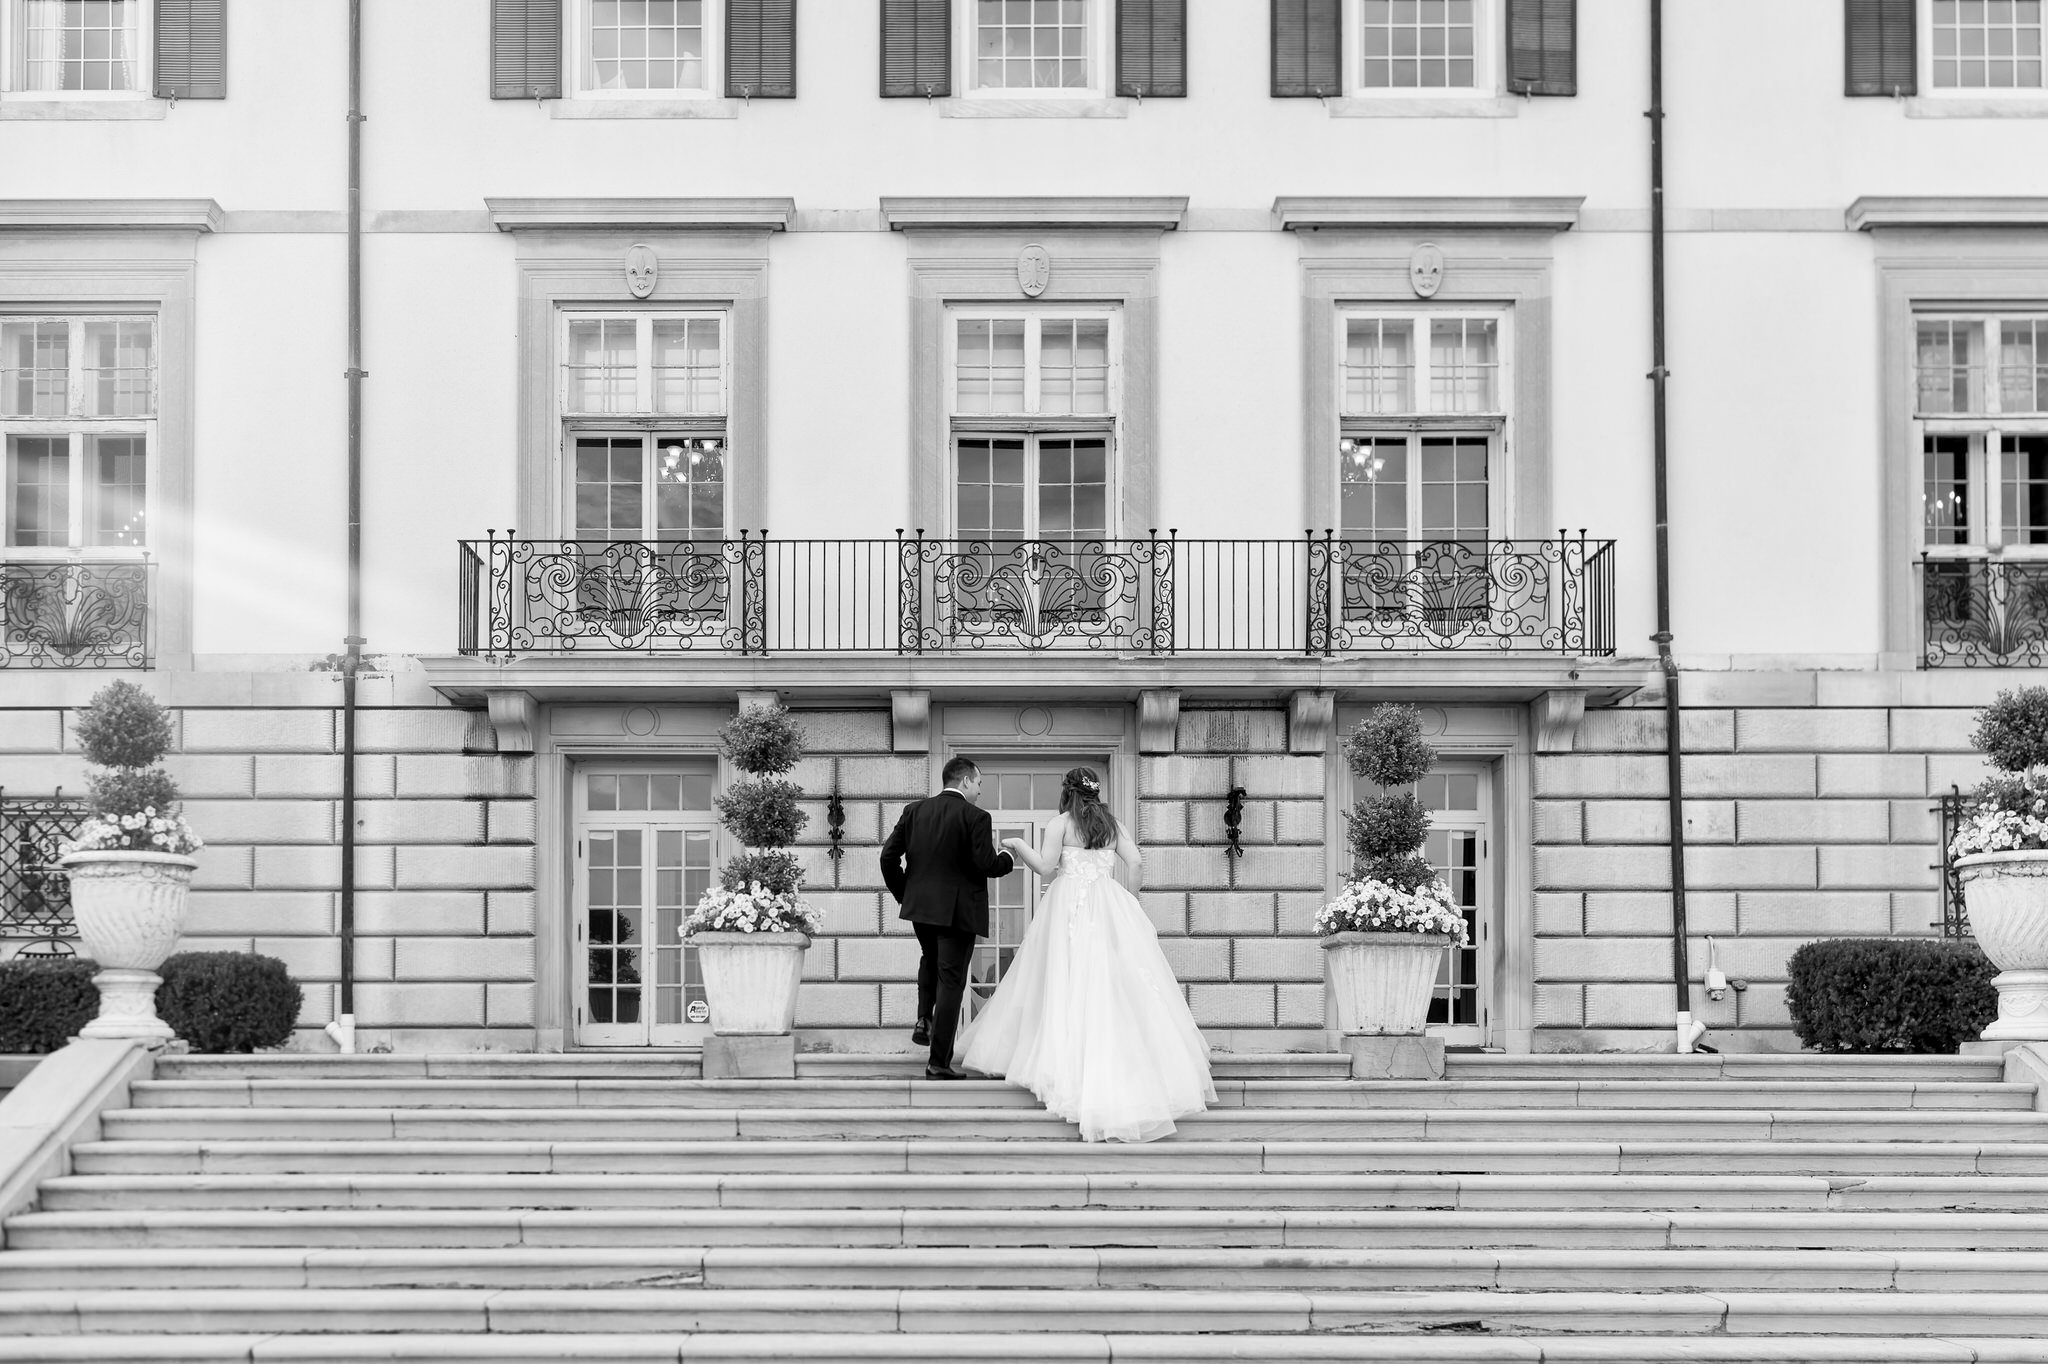 A bride and groom walk up steps during their wedding at the War Memorial.  